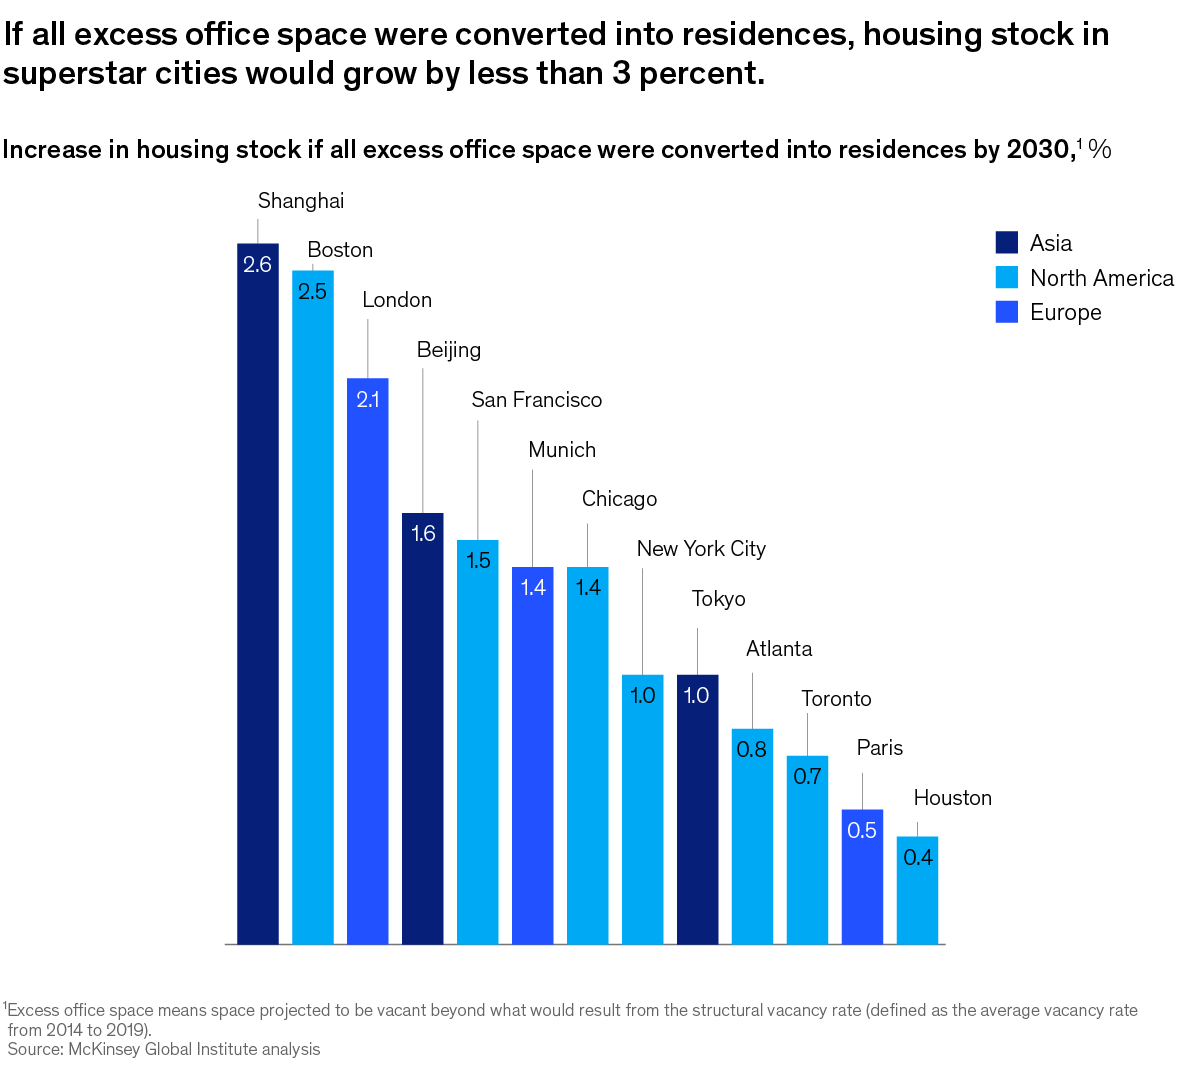 A chart titled “If all excess office space were converted into residences, housing stock in superstar cities would grow by less than 3 percent.” Click to open the full article on McKinsey.com.